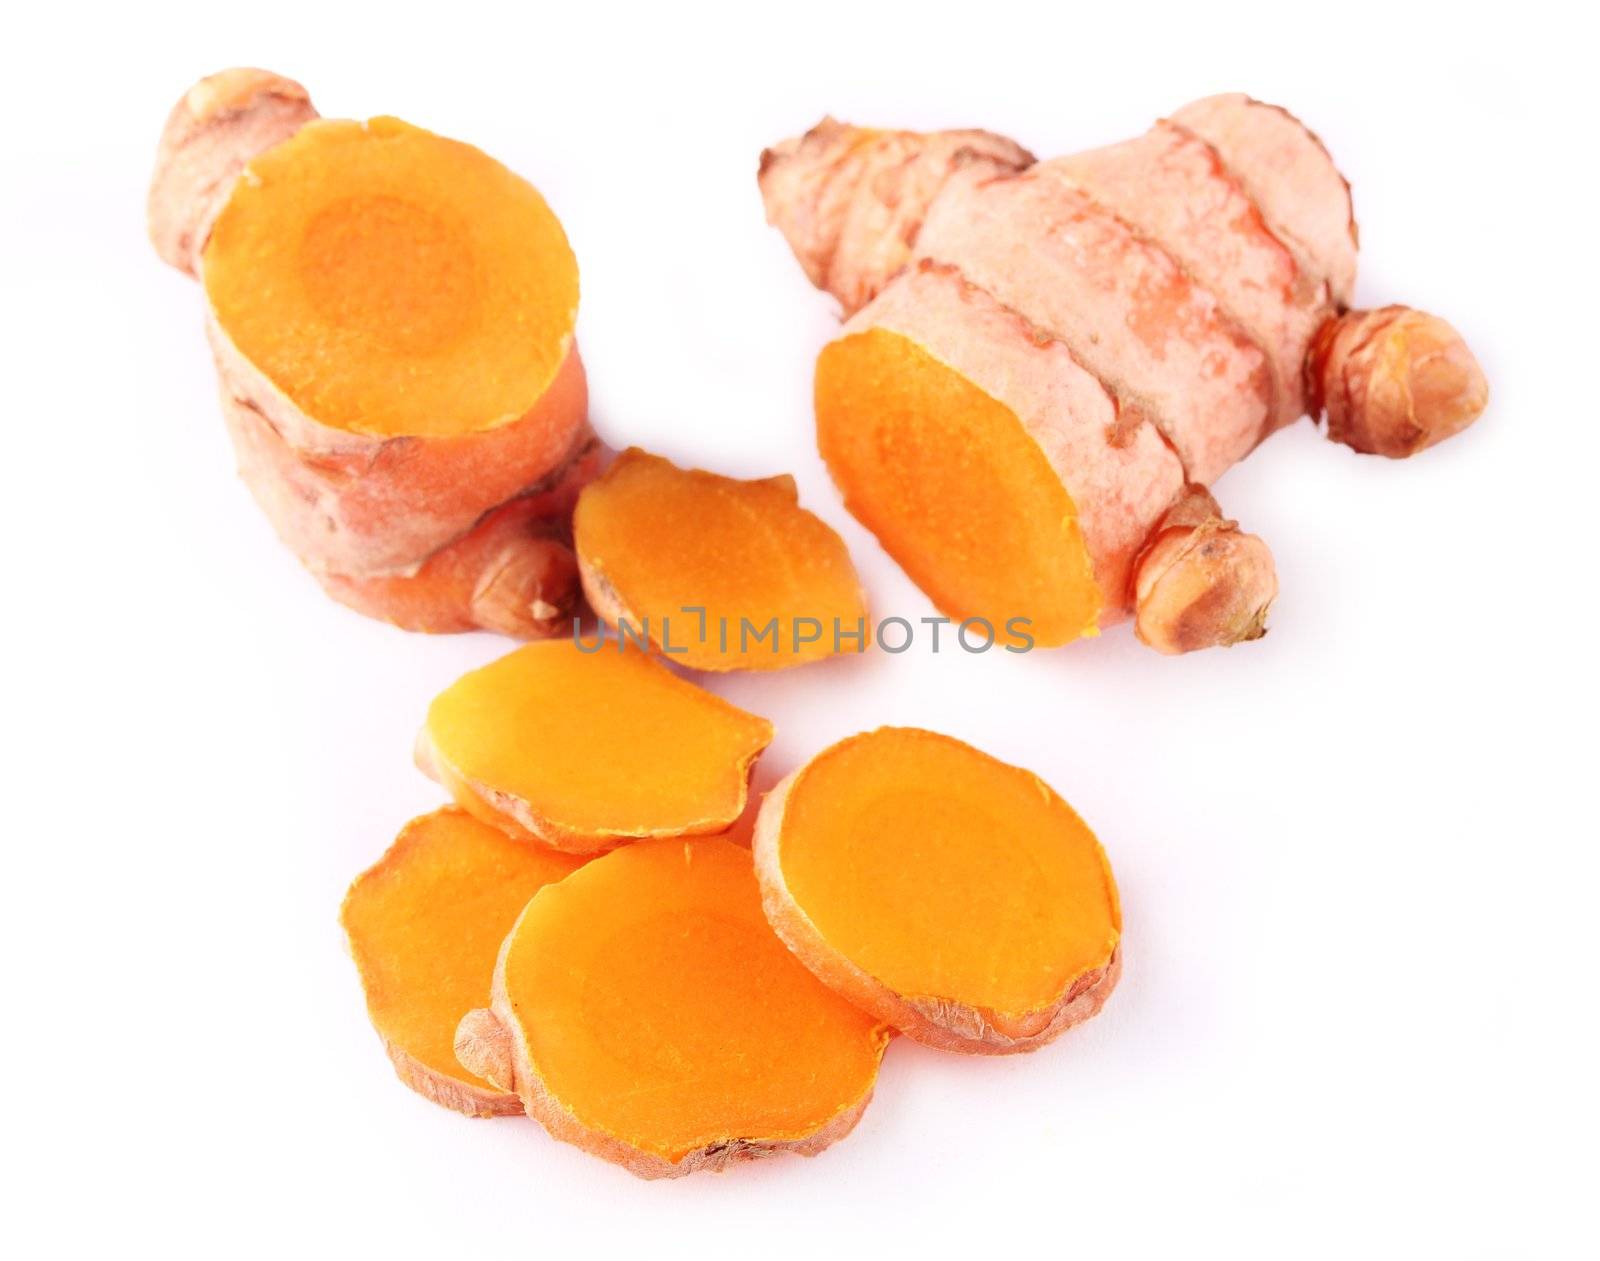 Fresh indian medicinal spice turmeric or longa sliced and displayed on white.